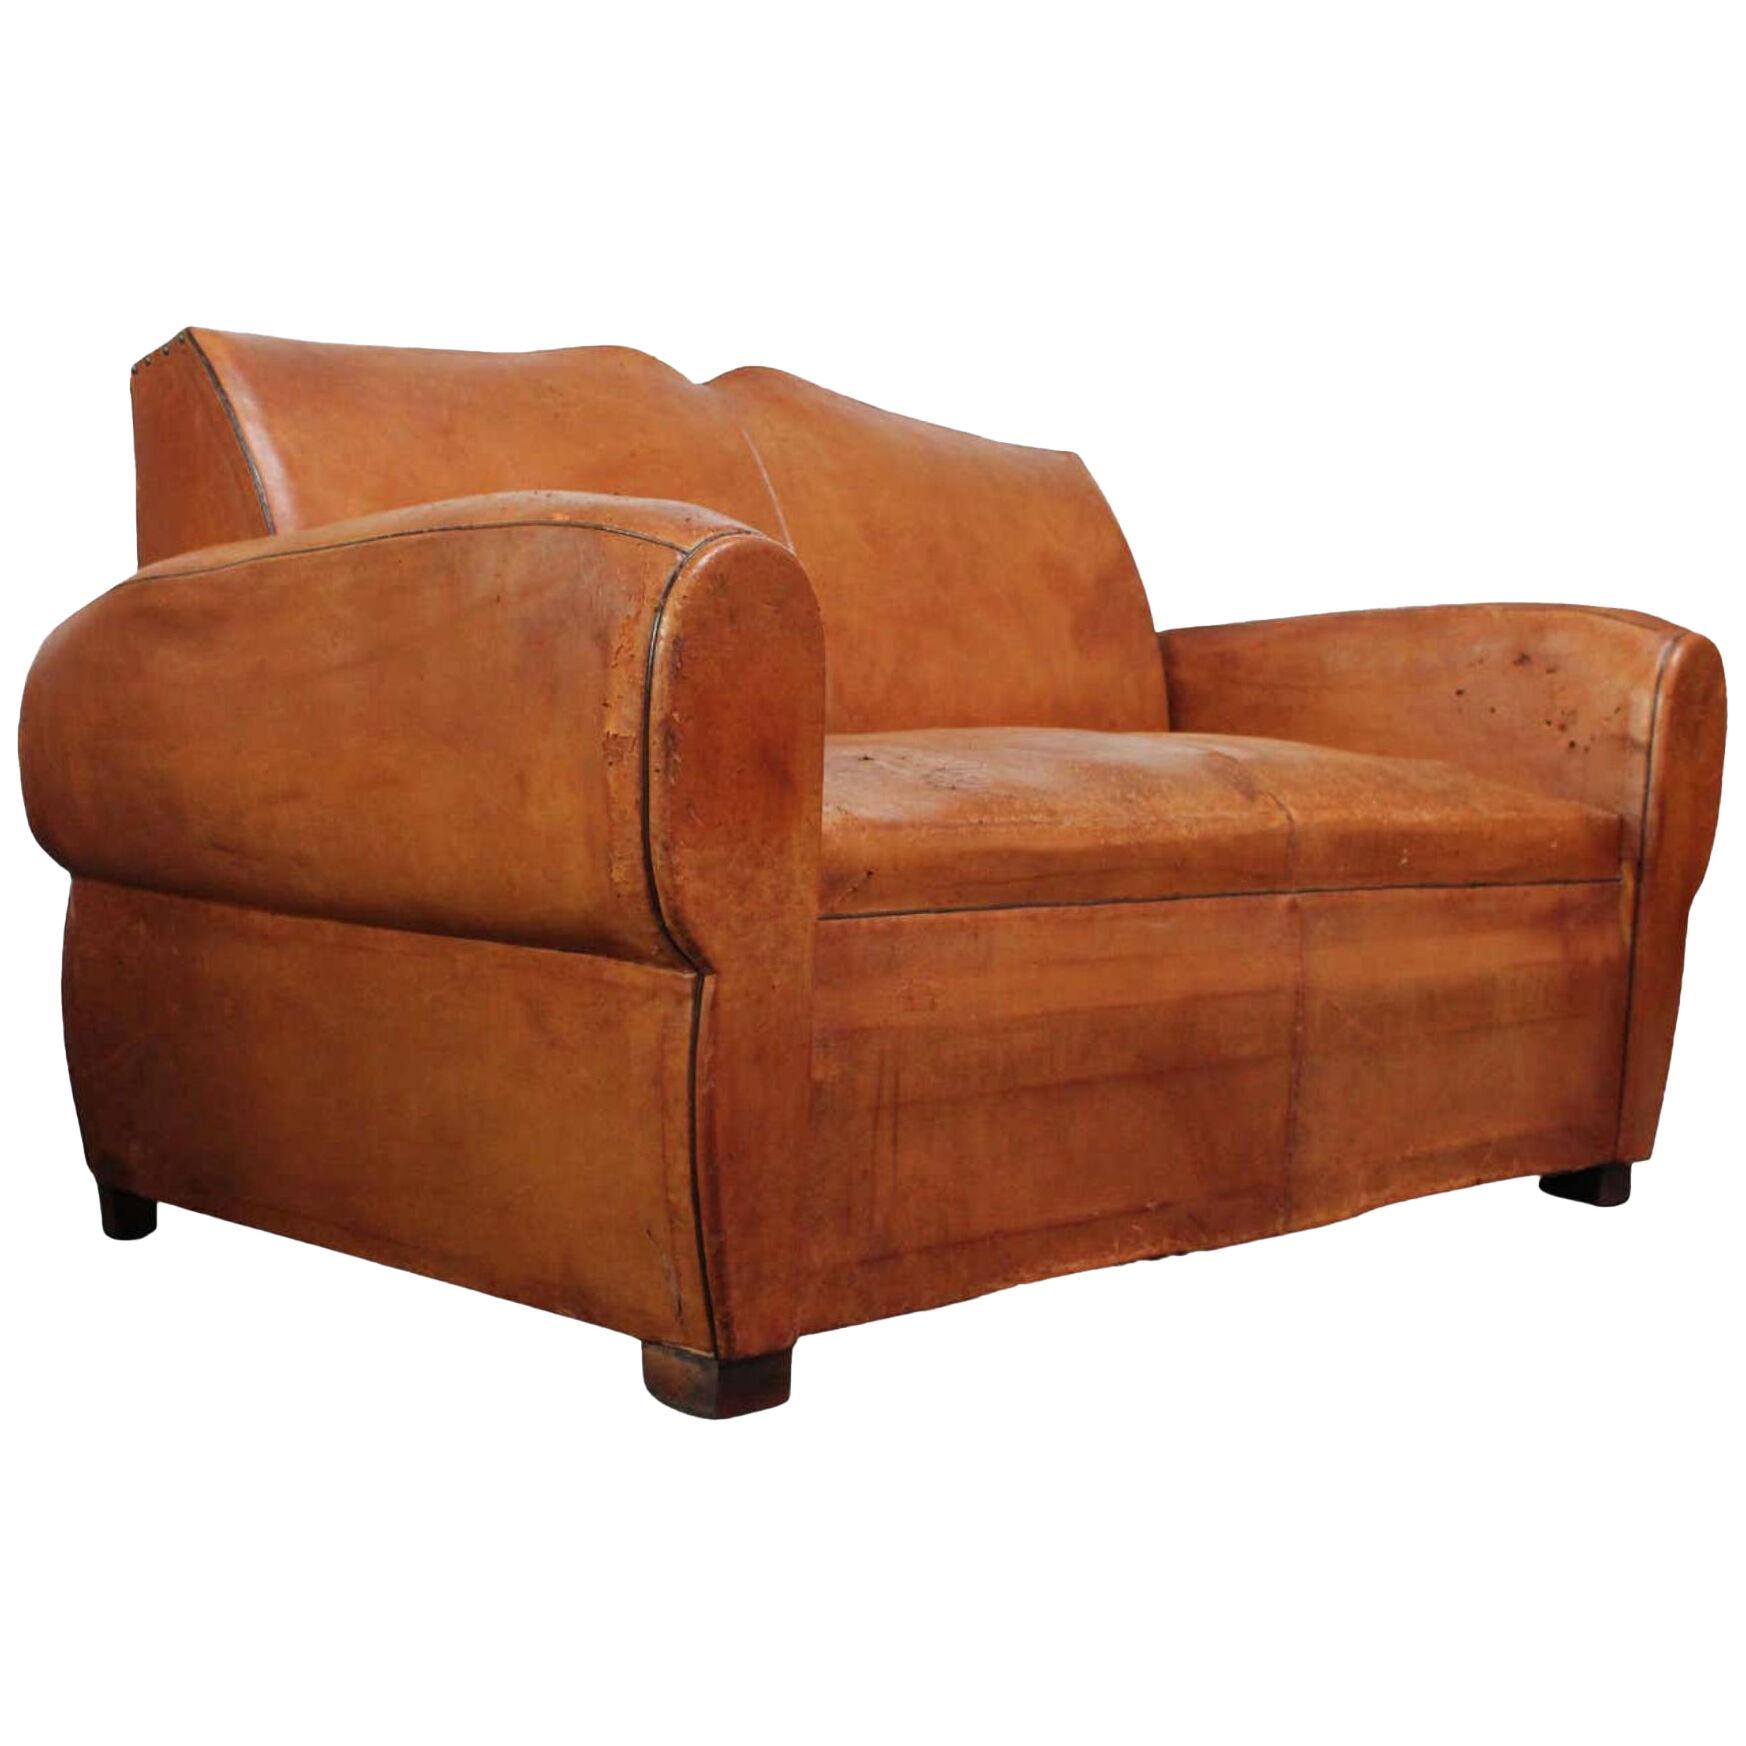 French Deco Leather "Mustache" Loveseat / Settee